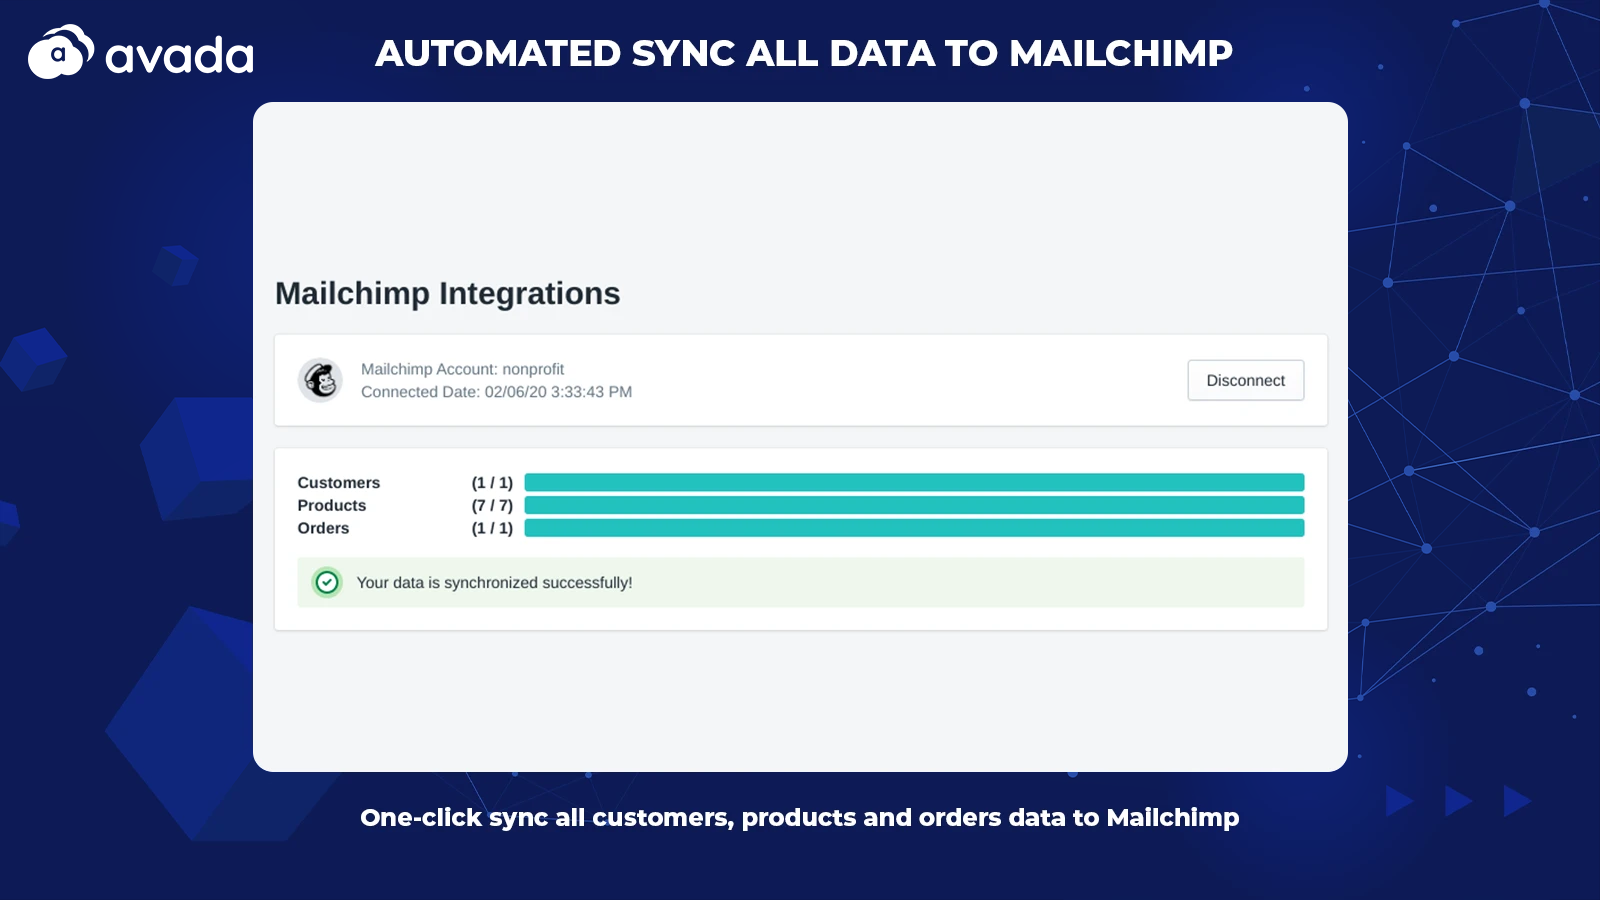 Automated sync all data to Mailchimp